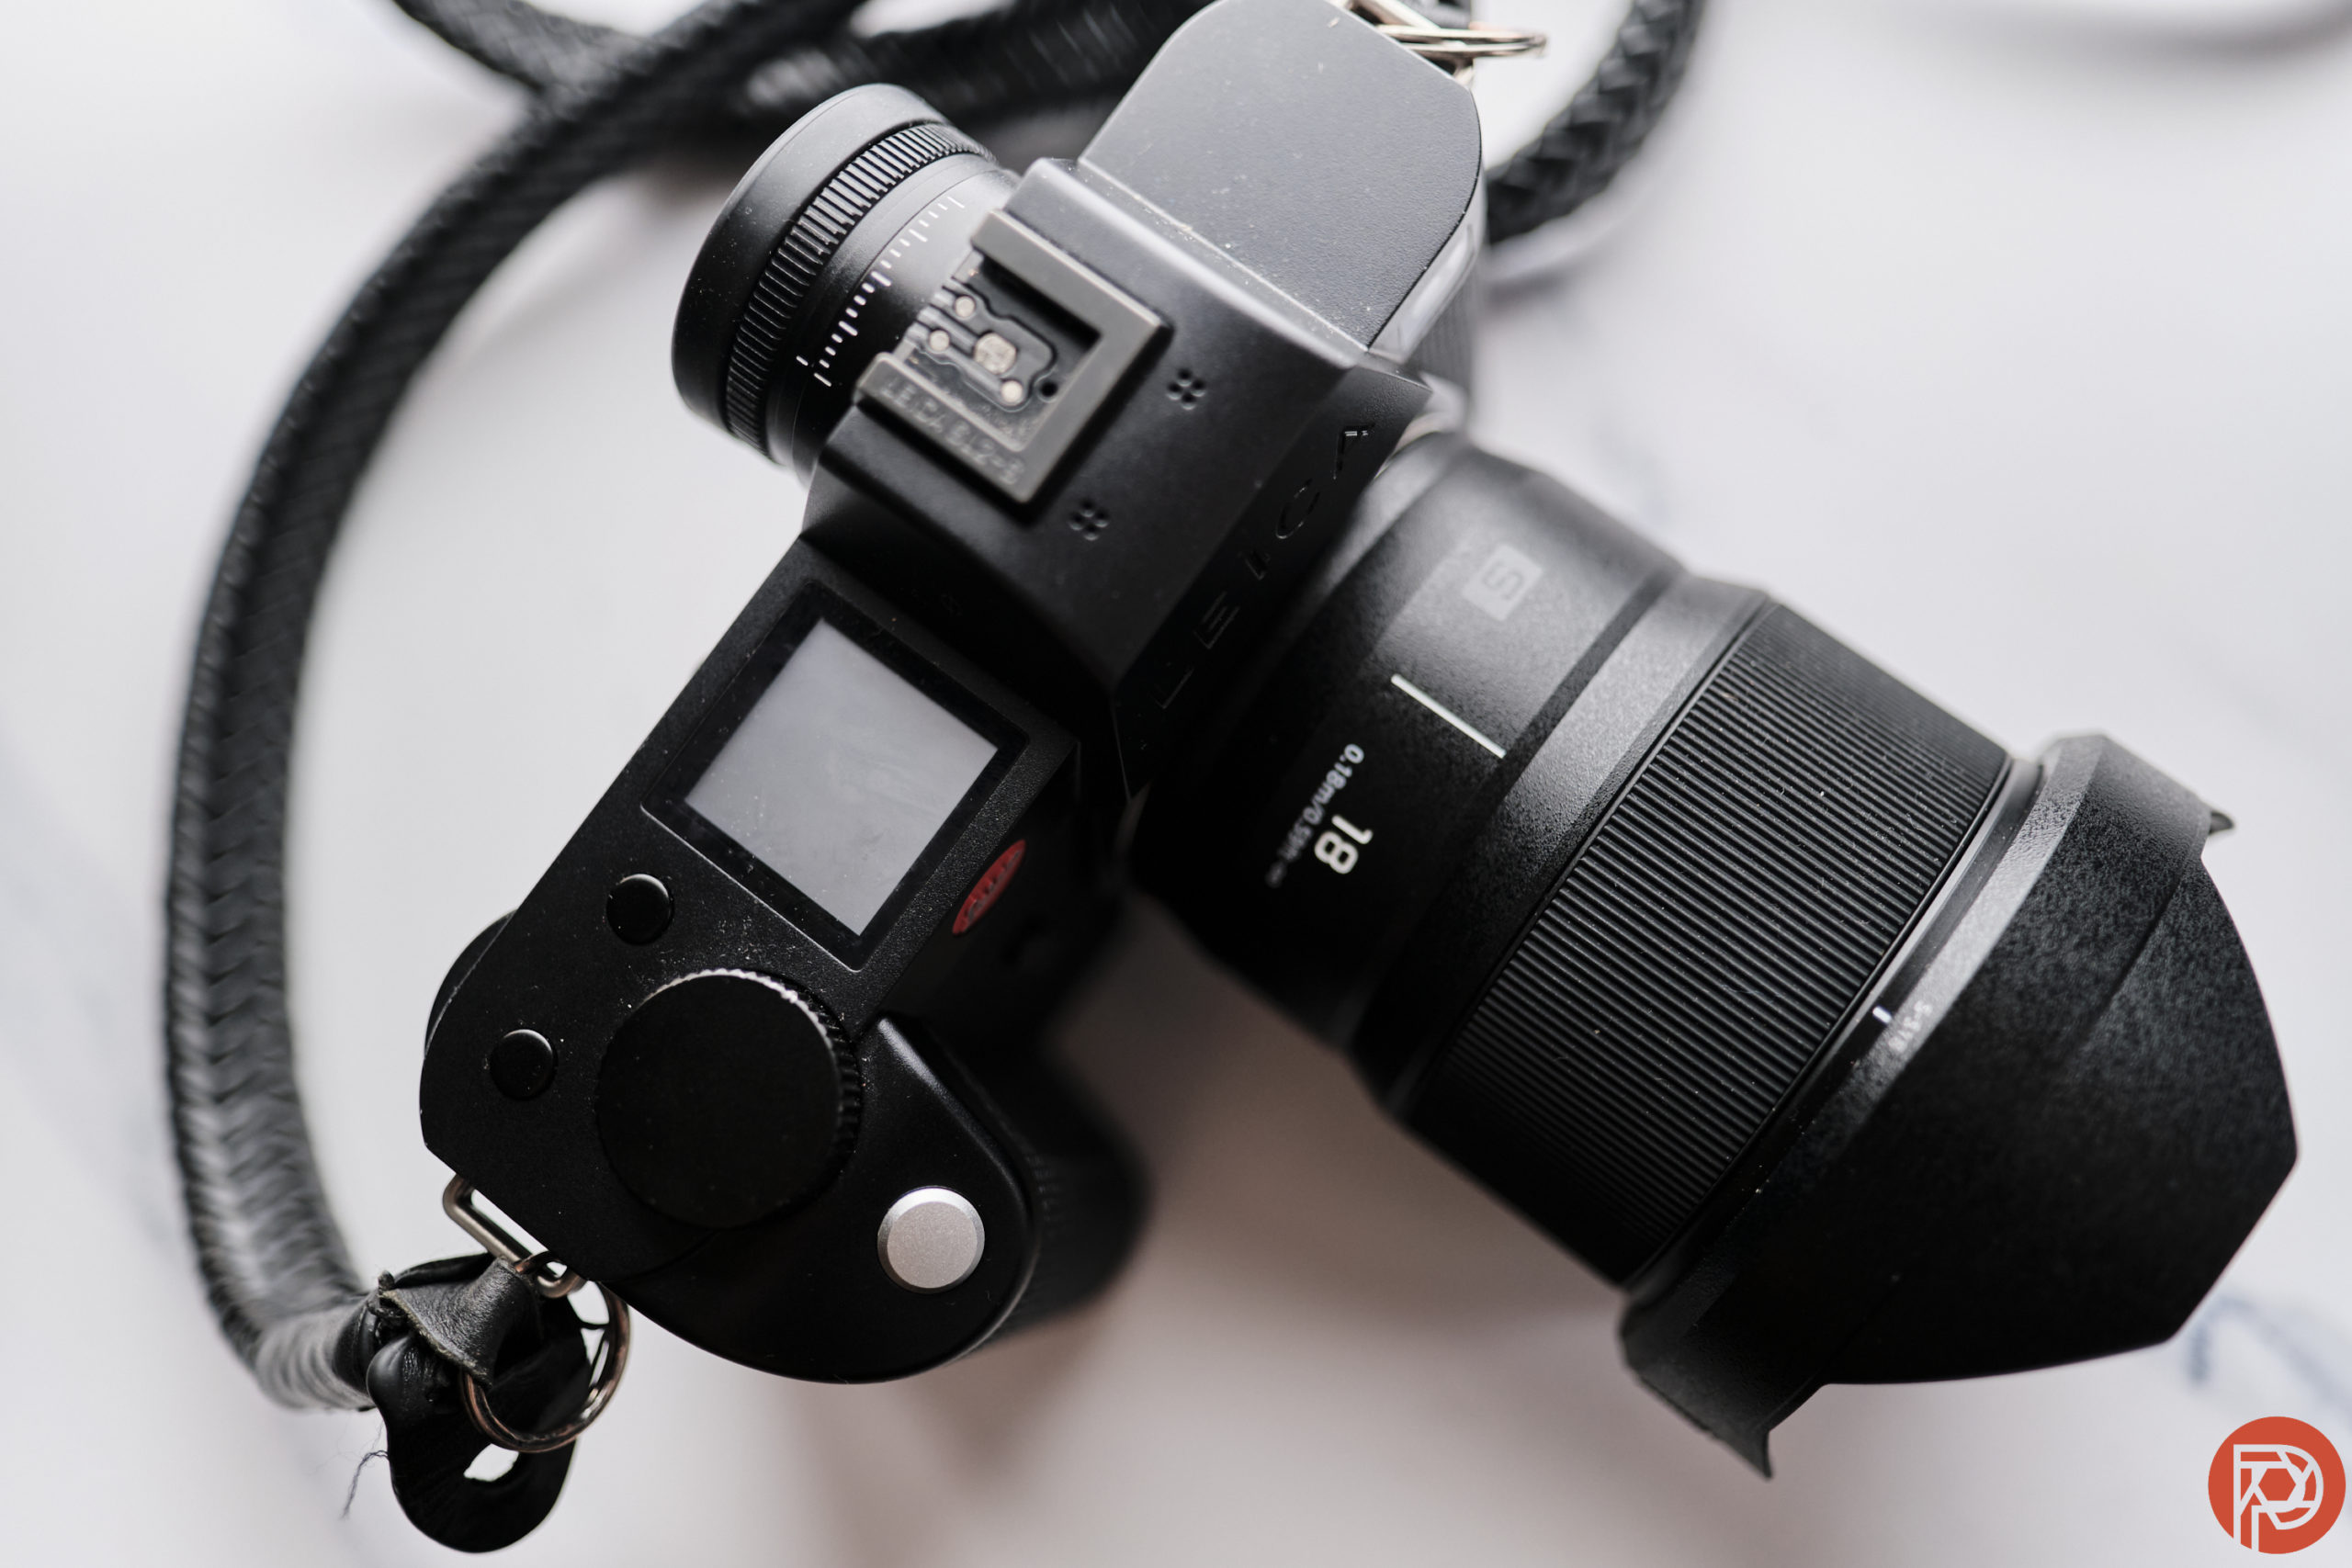 Chris Gampat The Phoblographer Panasonic 18mm f1.8 product images review 1.41-280s400